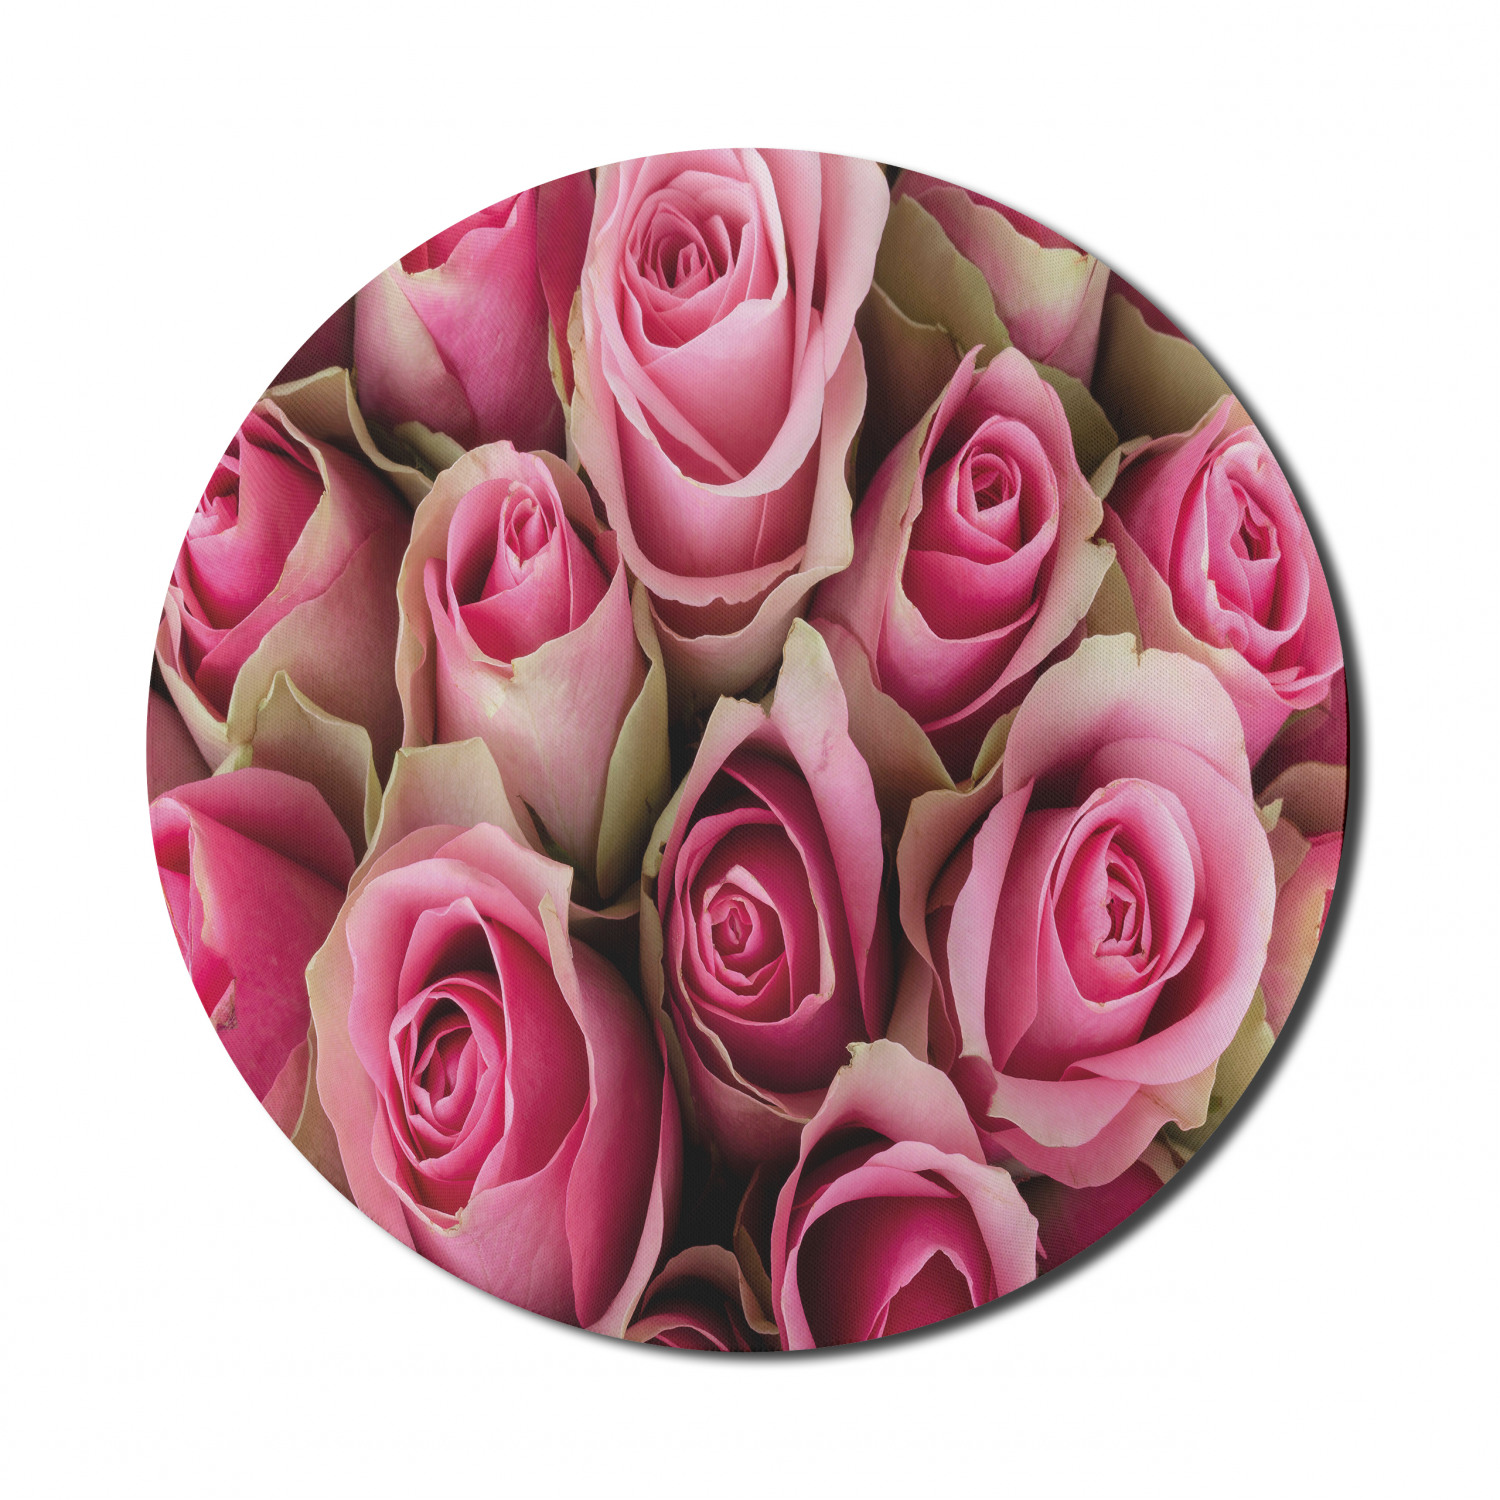 Rose Mouse Pad for Computers, Blooming Fresh Pink Roses Bridal Bouquet Romance Sweetheart Valentine, Round Non-Slip Thick Rubber Modern Gaming Mousepad, 8" Round, Pink Pale Green, by Ambesonne - image 1 of 2